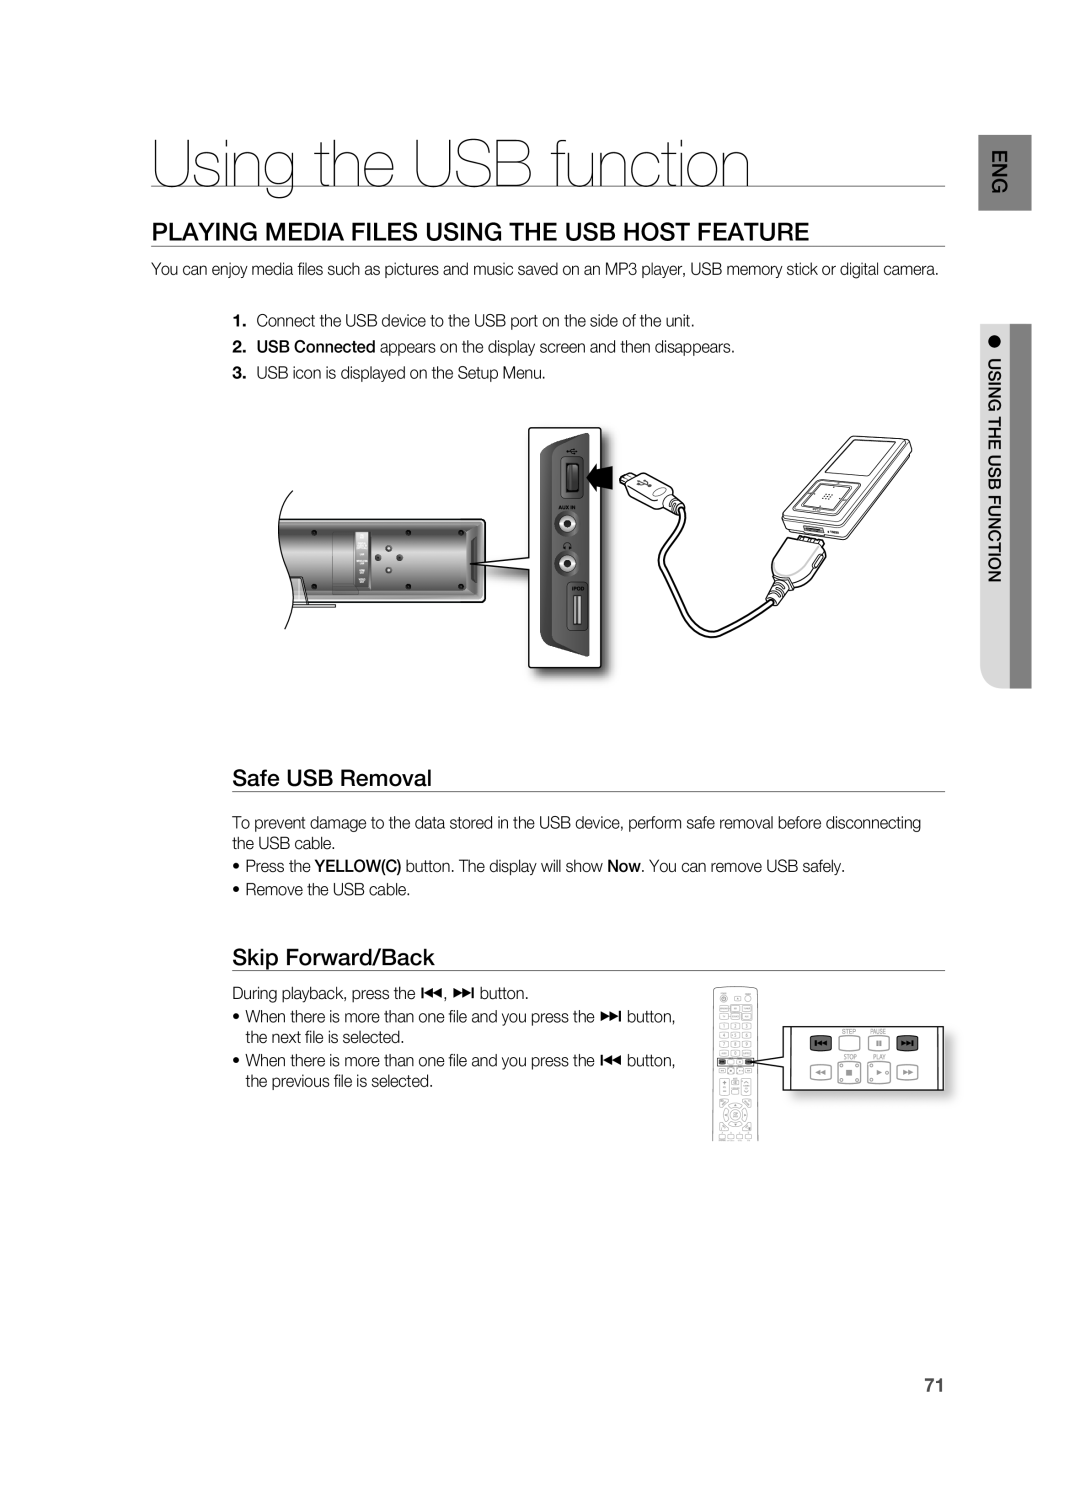 Samsung HT-BD8200 user manual Using the USB function, Playing Media Files Using The Usb Host Feature, Safe USB Removal 